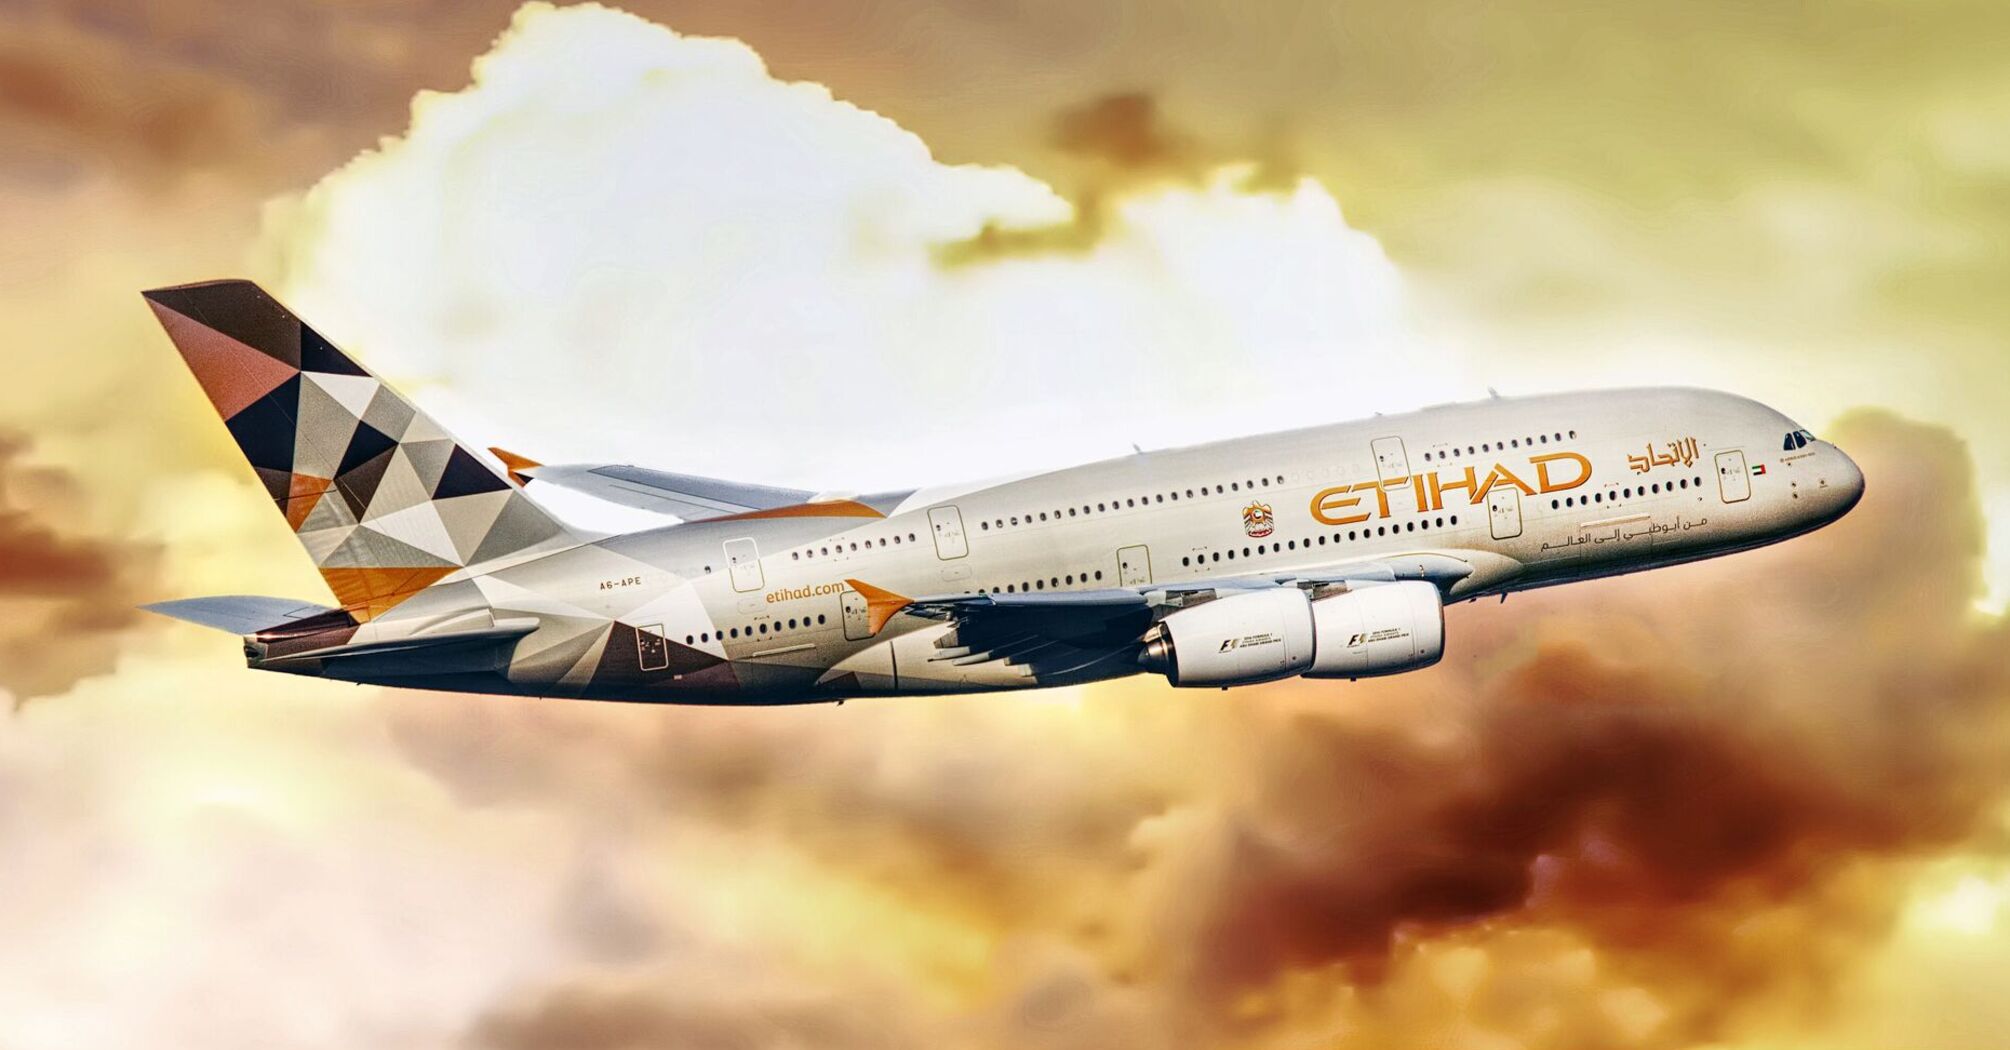 Etihad Airways airplane in flight against a backdrop of golden clouds